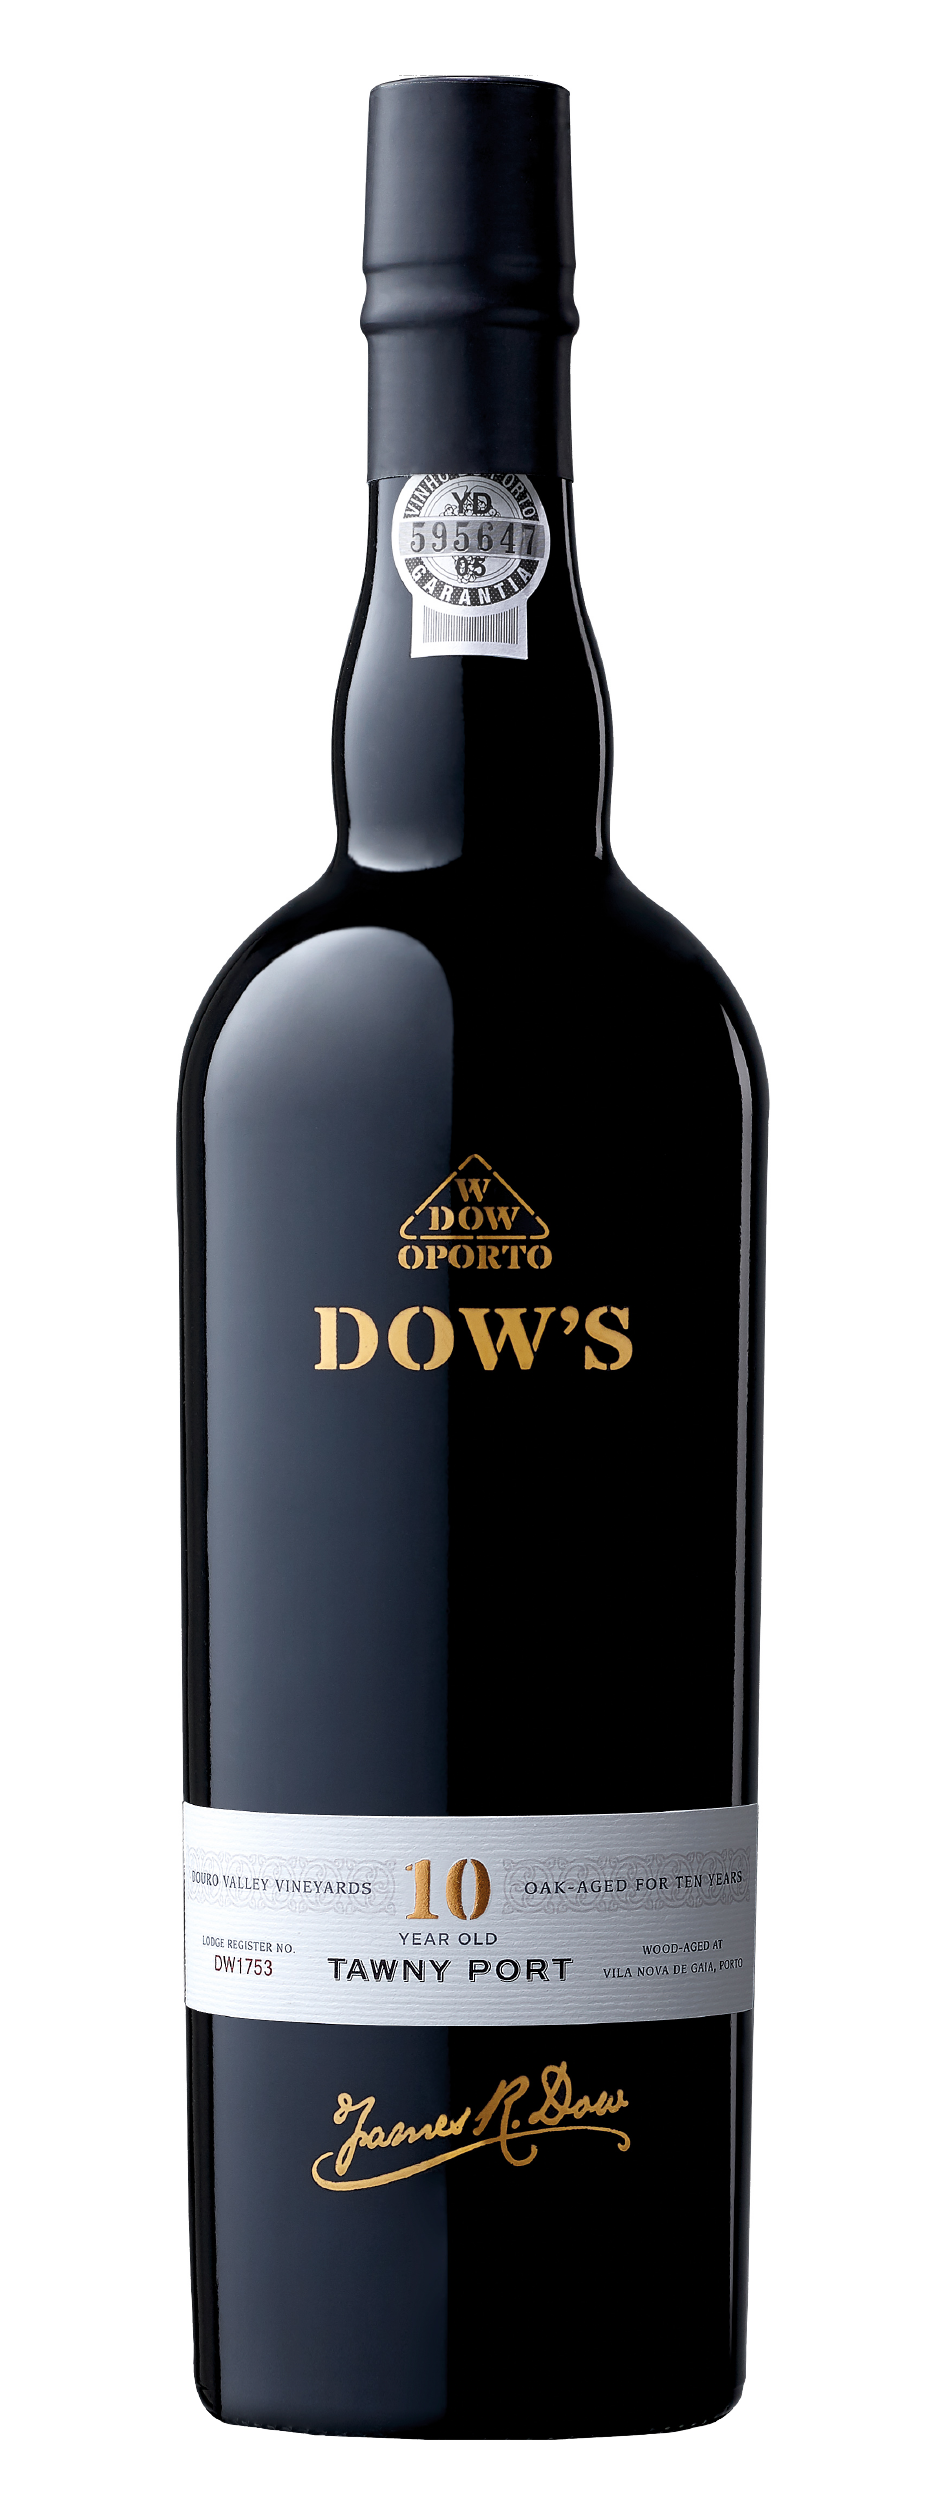 Product Image for DOW'S 10 YEAR OLD TAWNY PORT